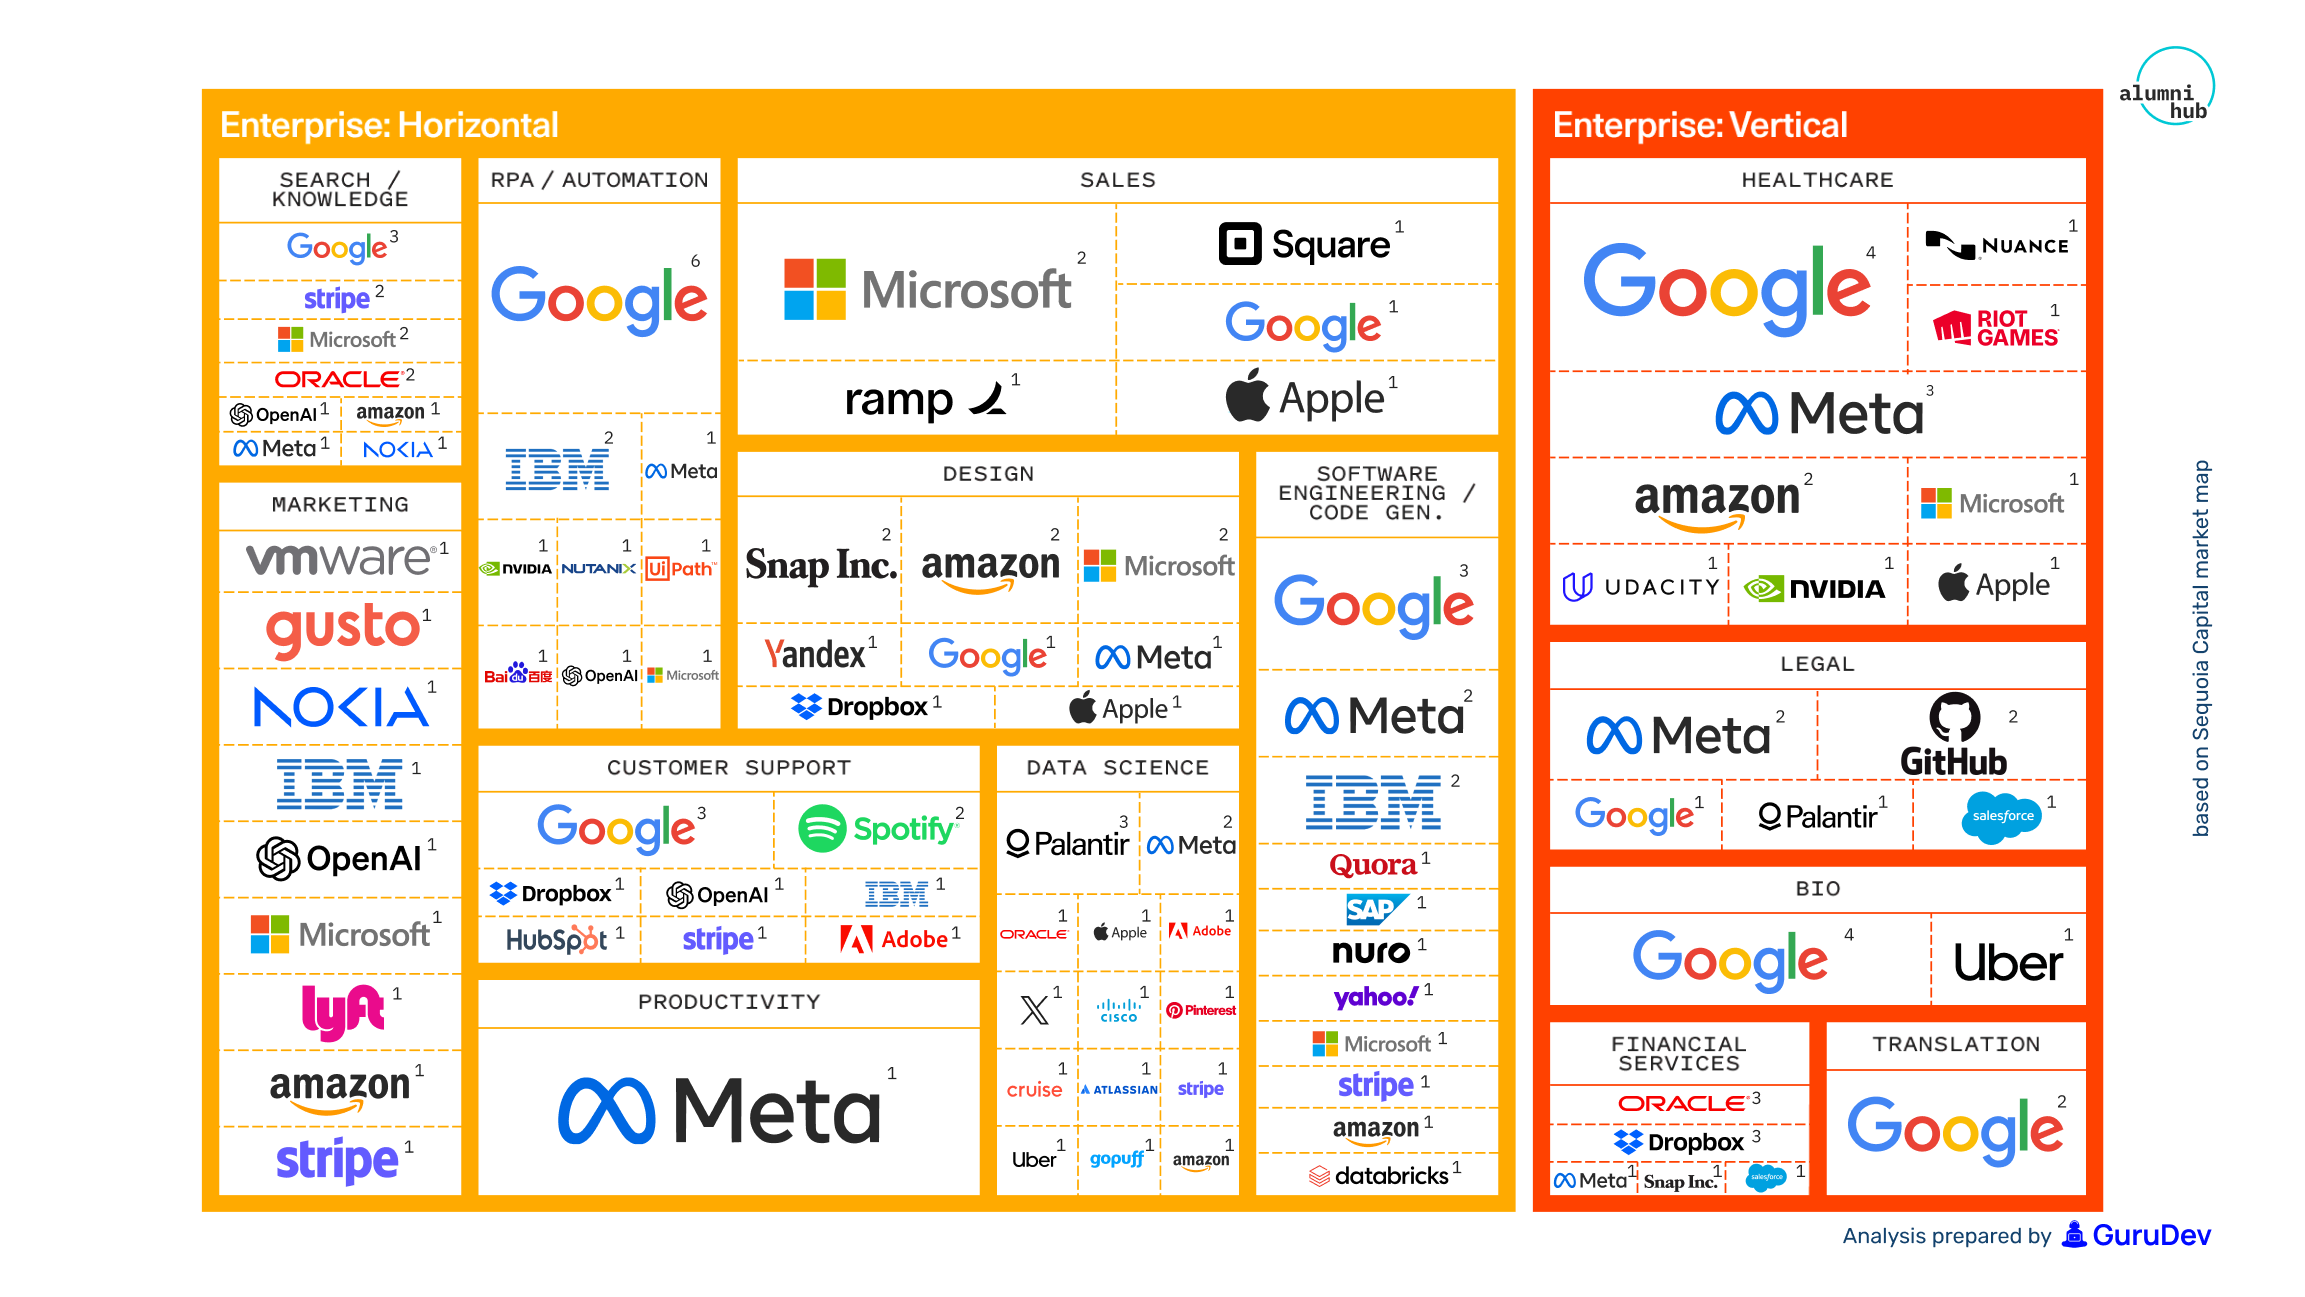 The map demonstrates from which Big Tech Companies the Alumni are coming from in the Enterprise horizontal and vertical segments.